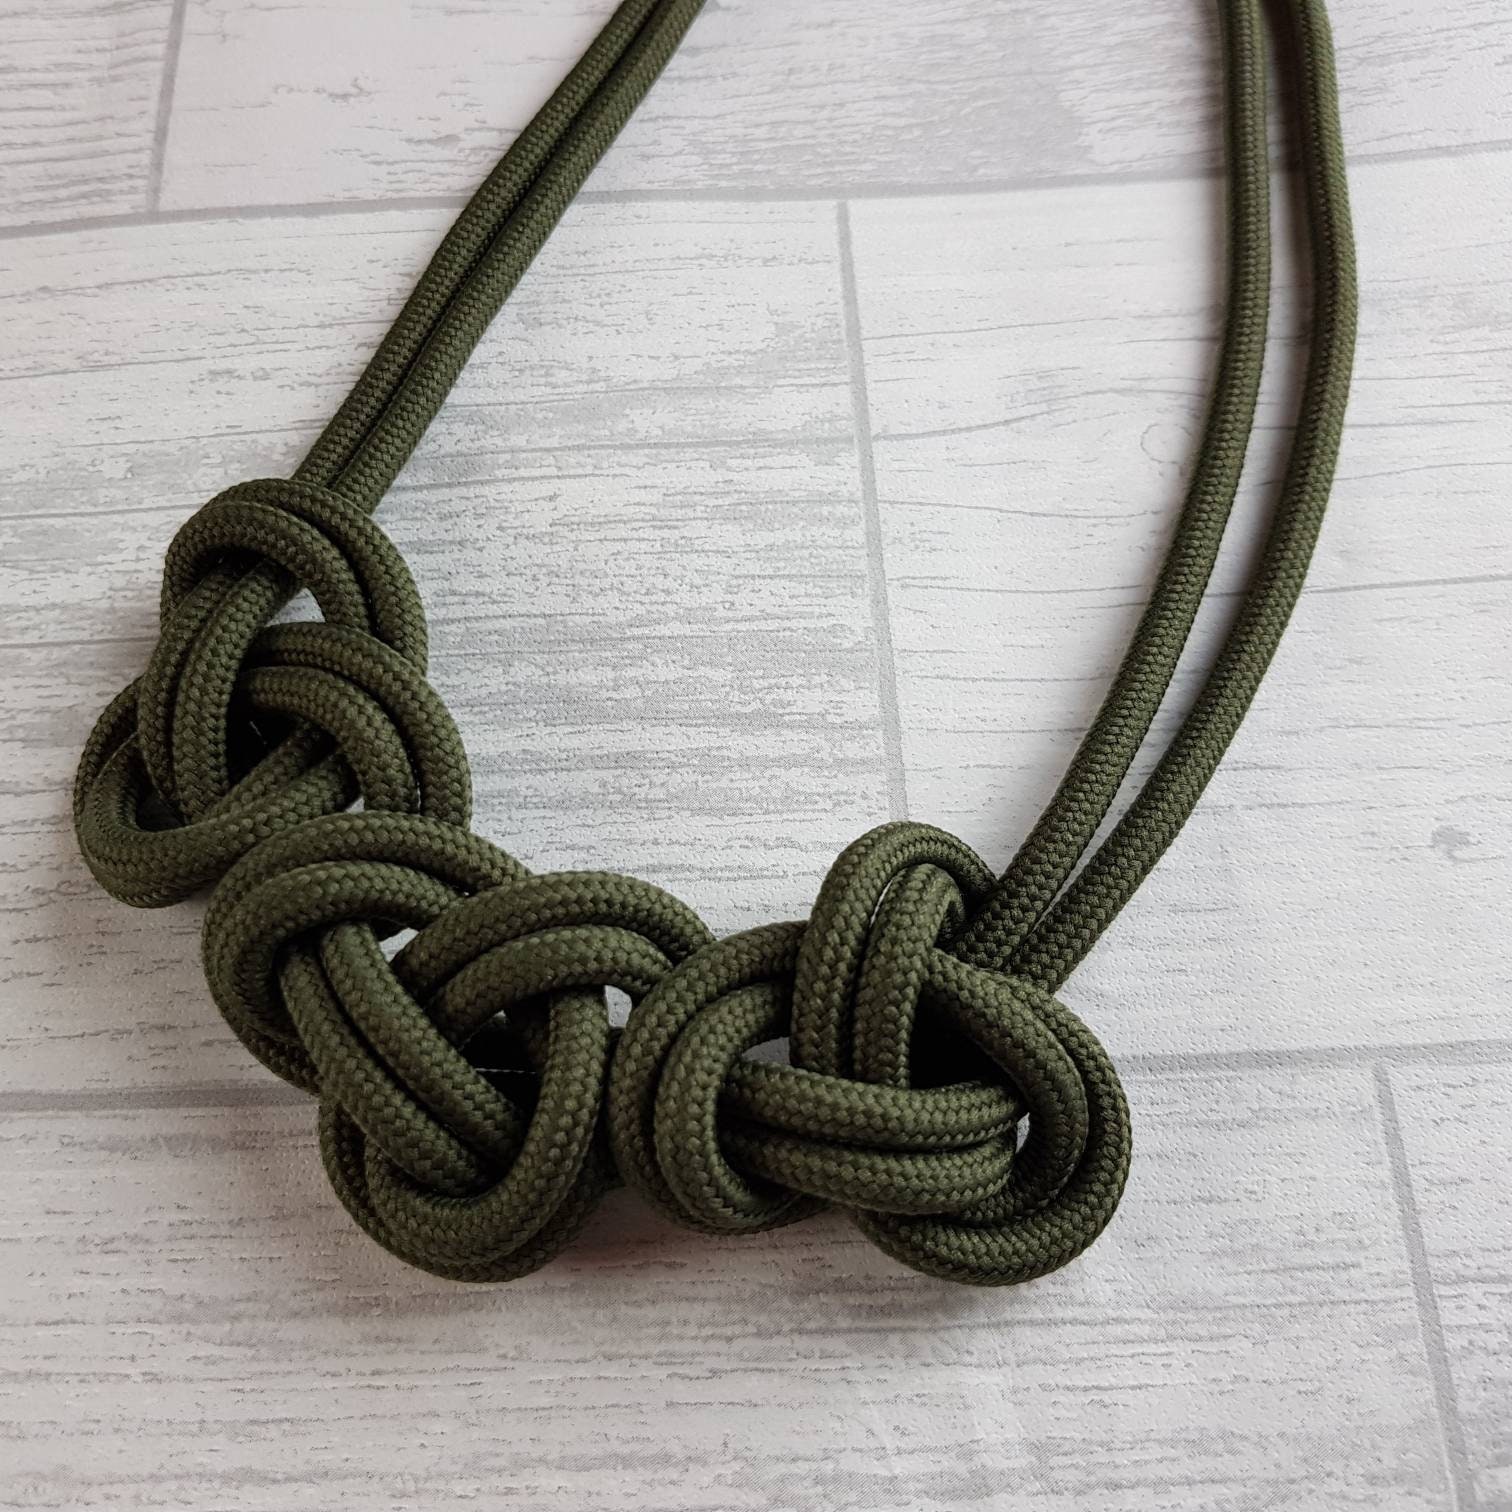 Aloe Woven Necklace - Braided Rope - Folksy